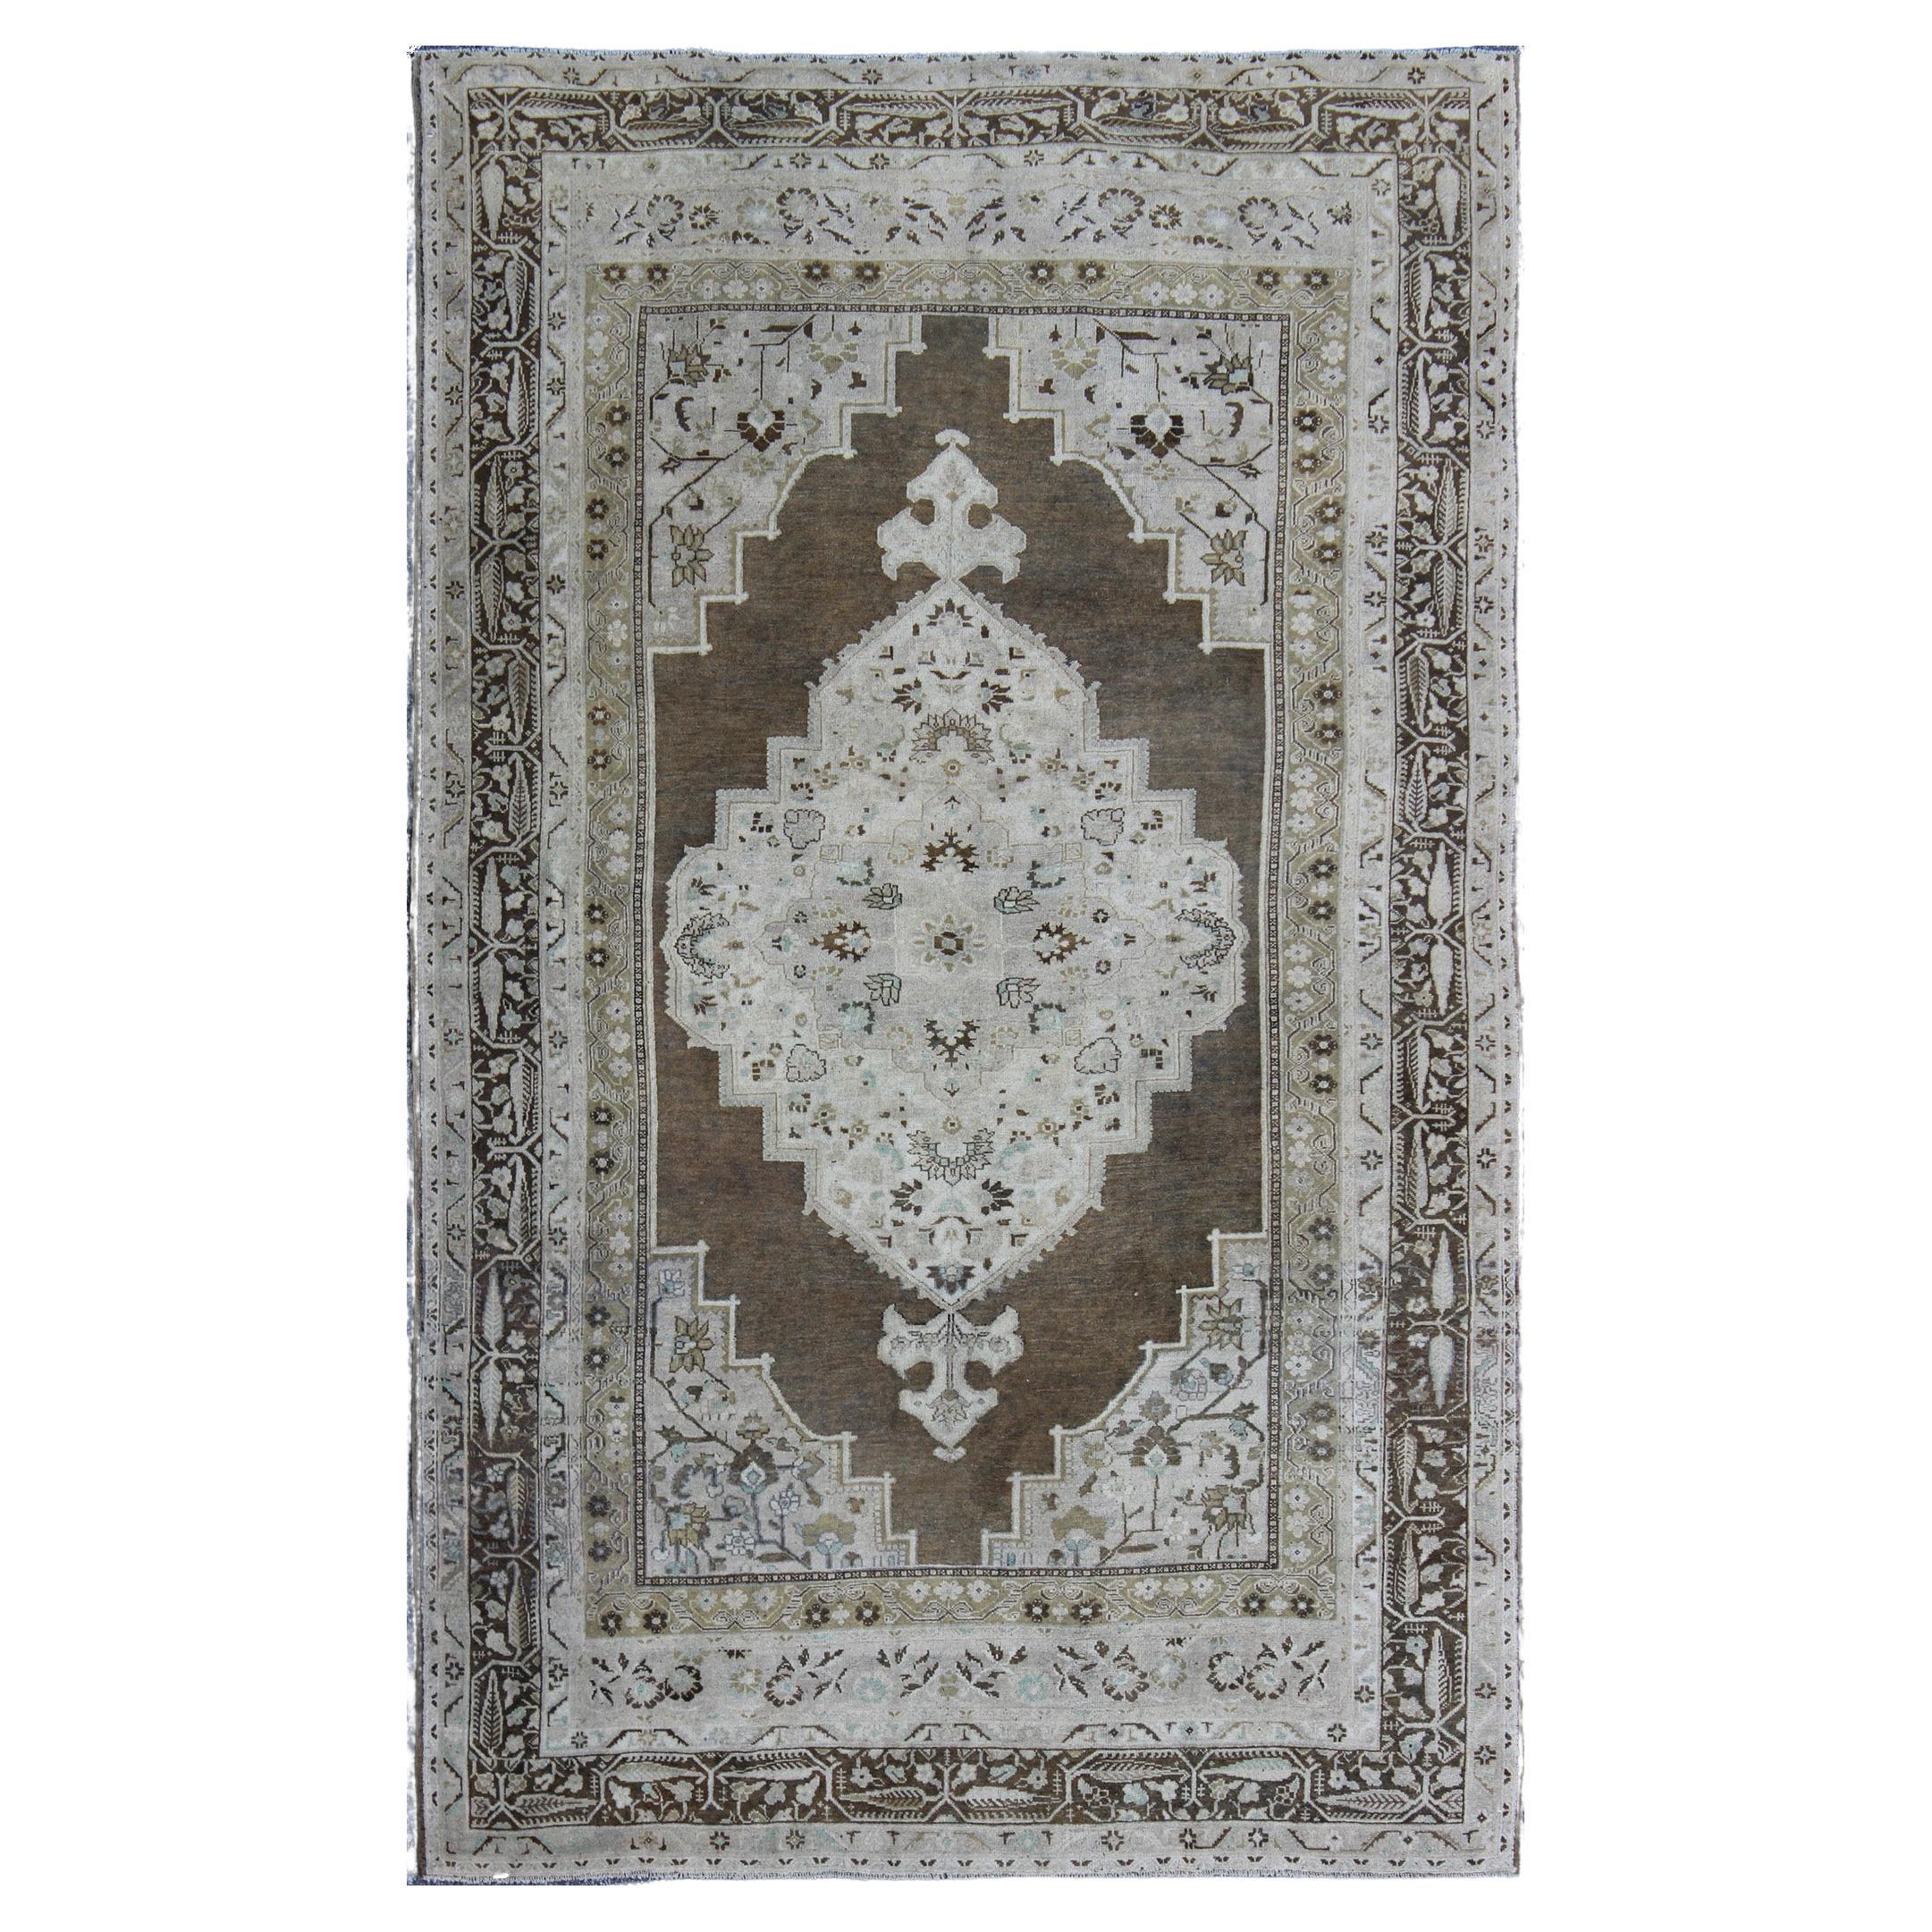 Vintage Turkish Oushak Rug with Medallion in Brown, Green & Neutral Colors